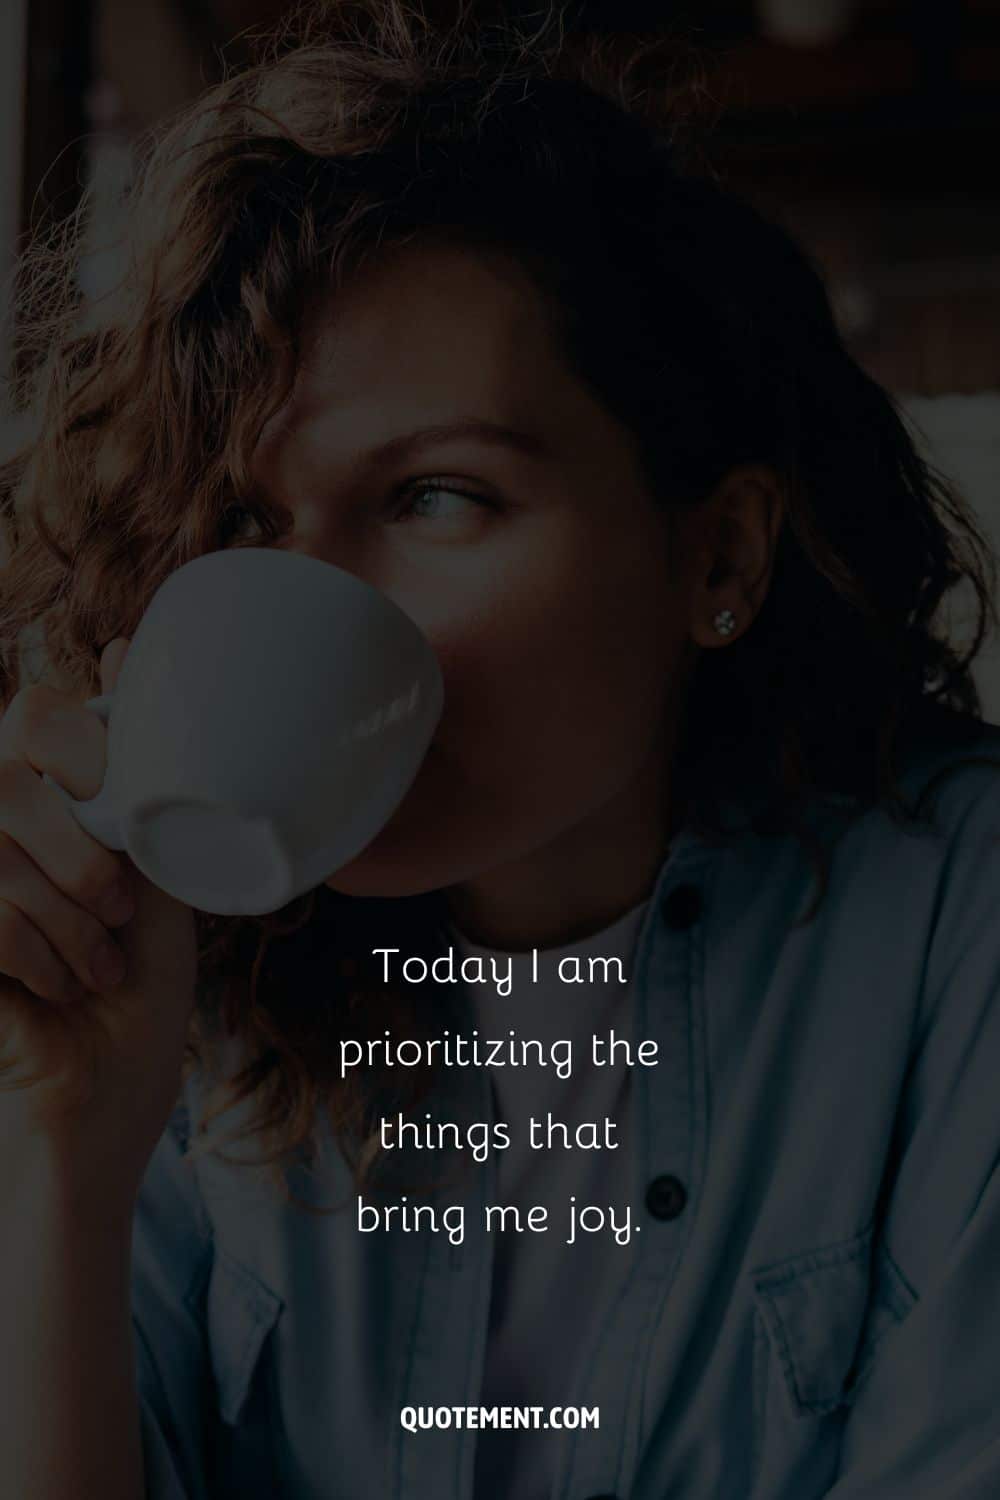 Image of a woman drinking from a cup representing Saturday affirmation